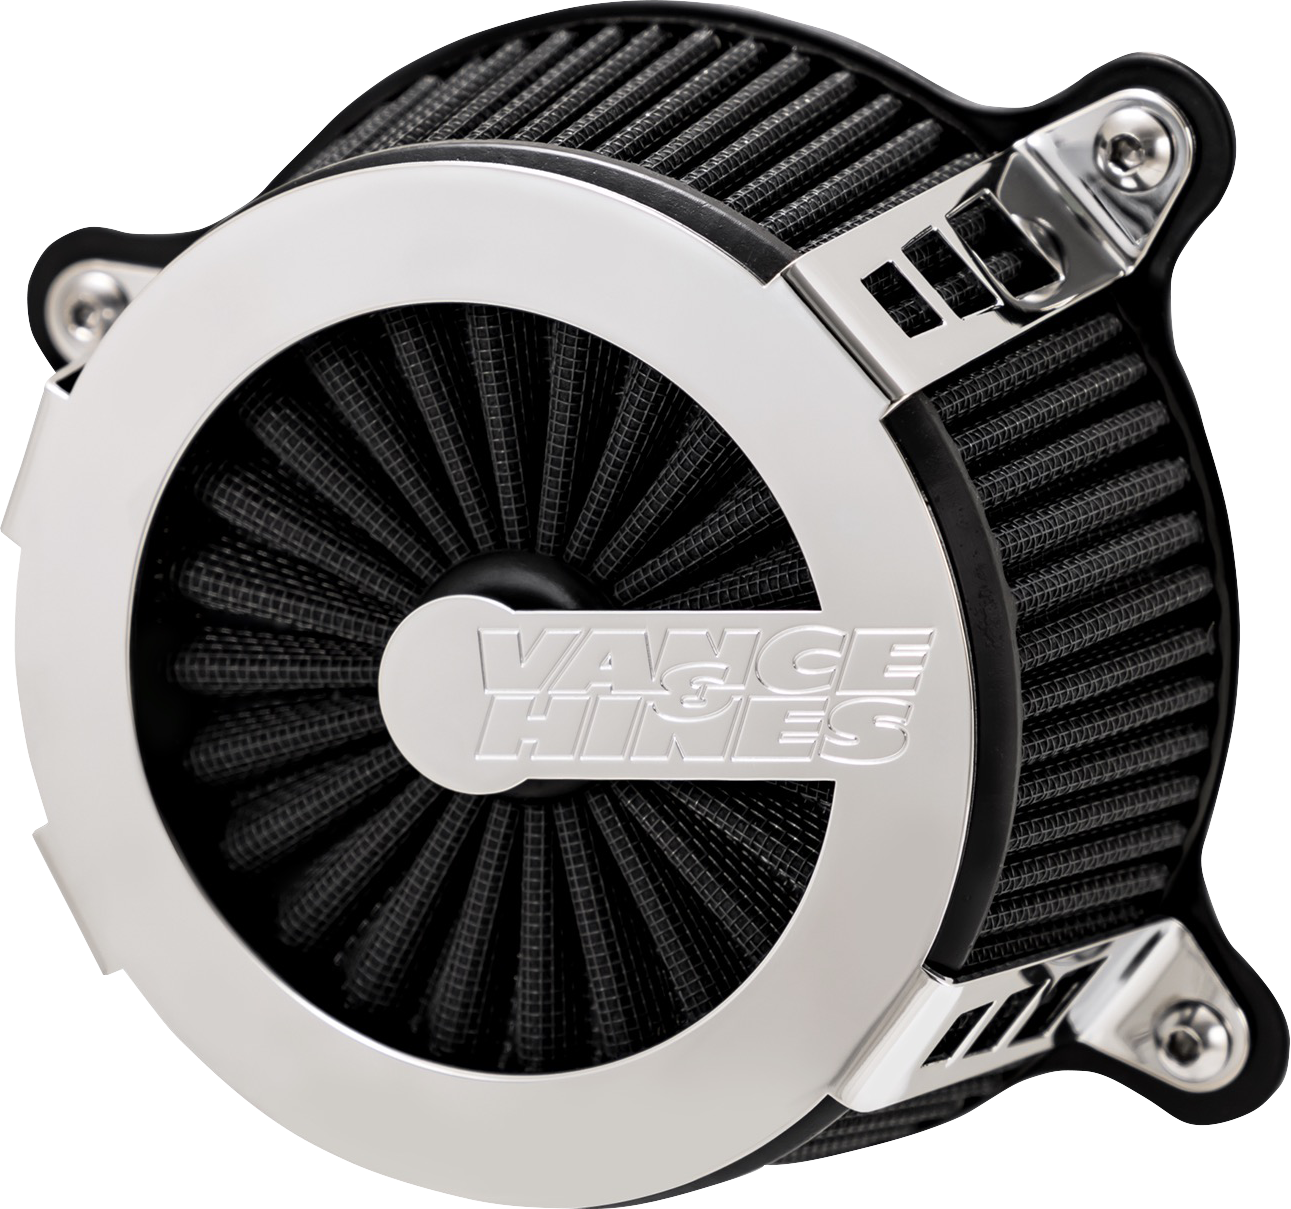 Vance & Hines VO2 Cage Fighter Air Cleaner 1999-2017 Harley Touring Softail FX